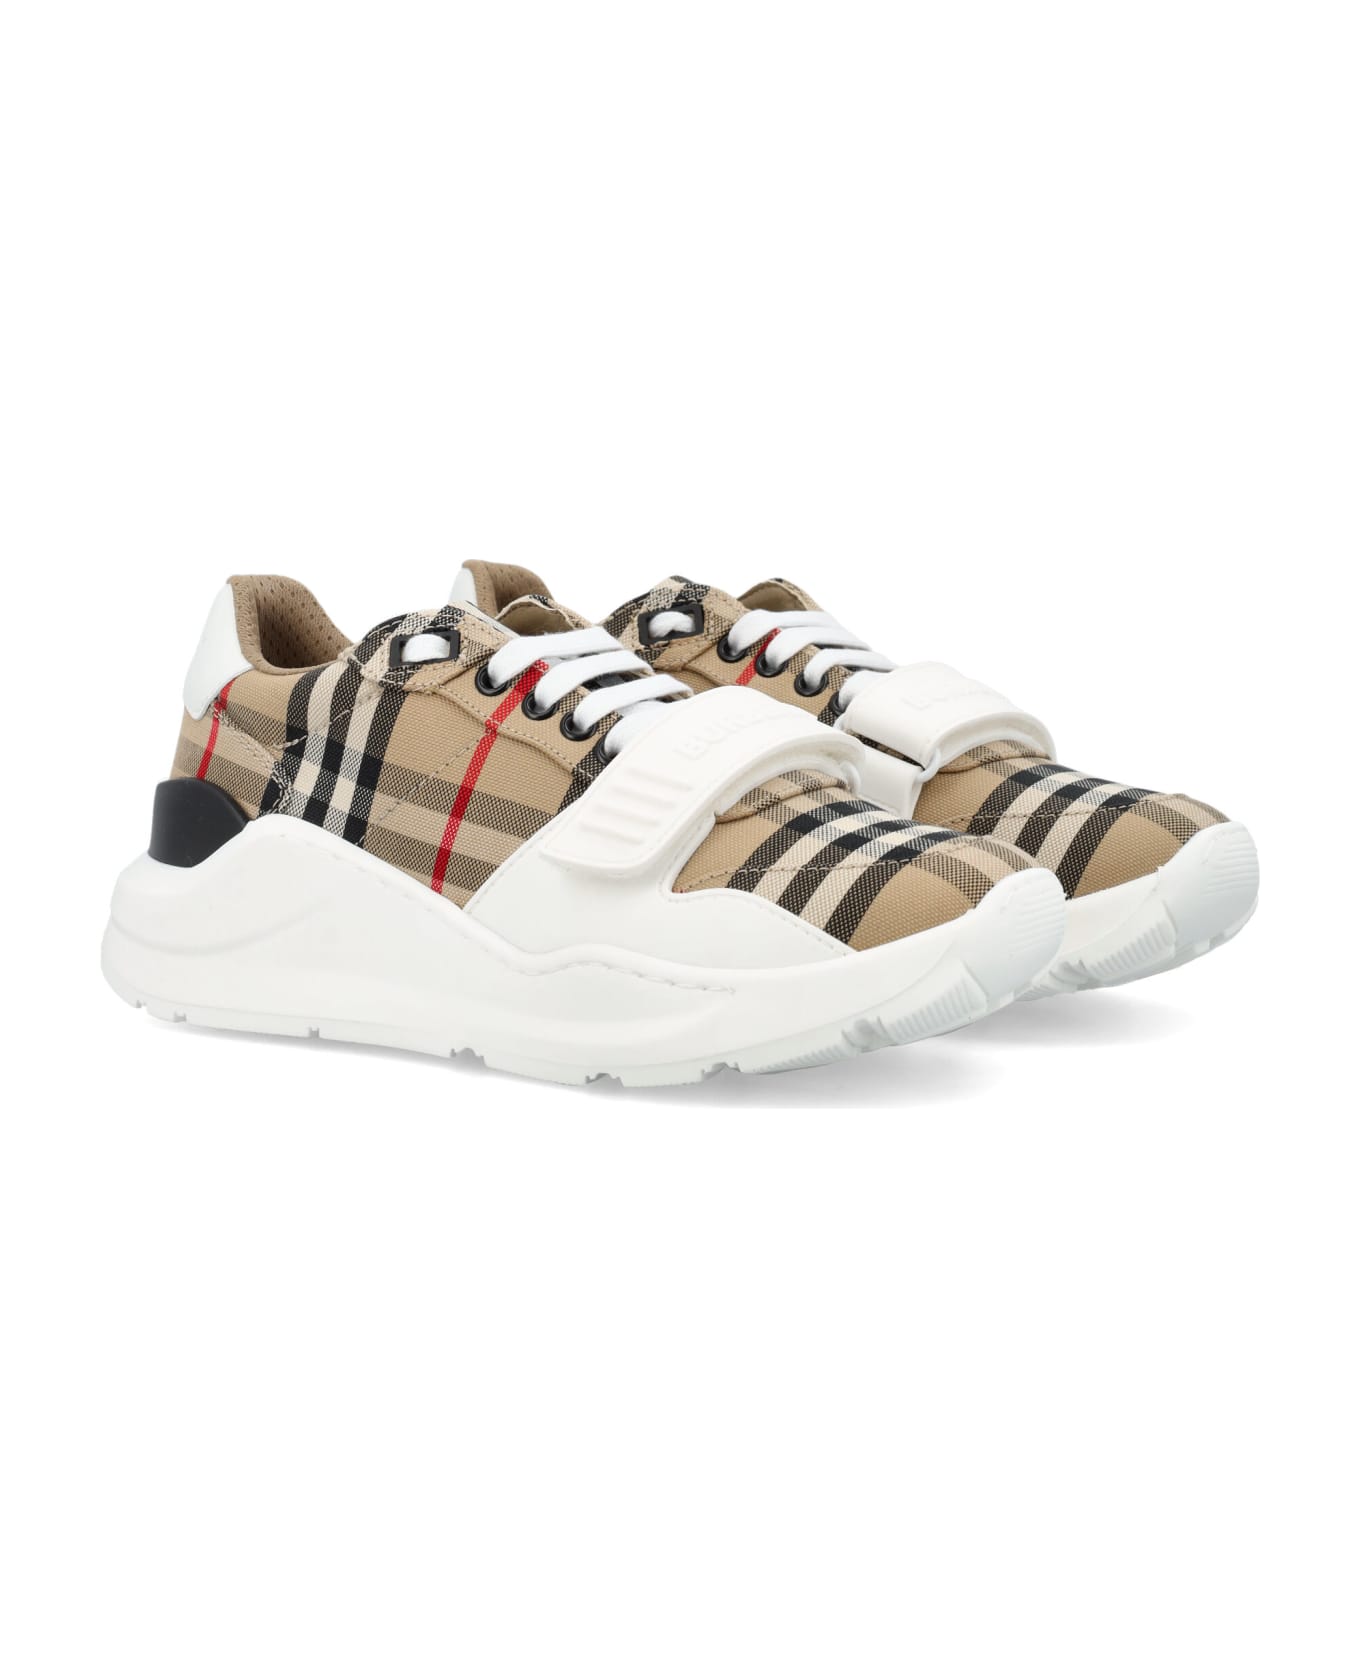 Burberry London Check Sneakers - ARCHIVE BEIGE IP CHK スニーカー